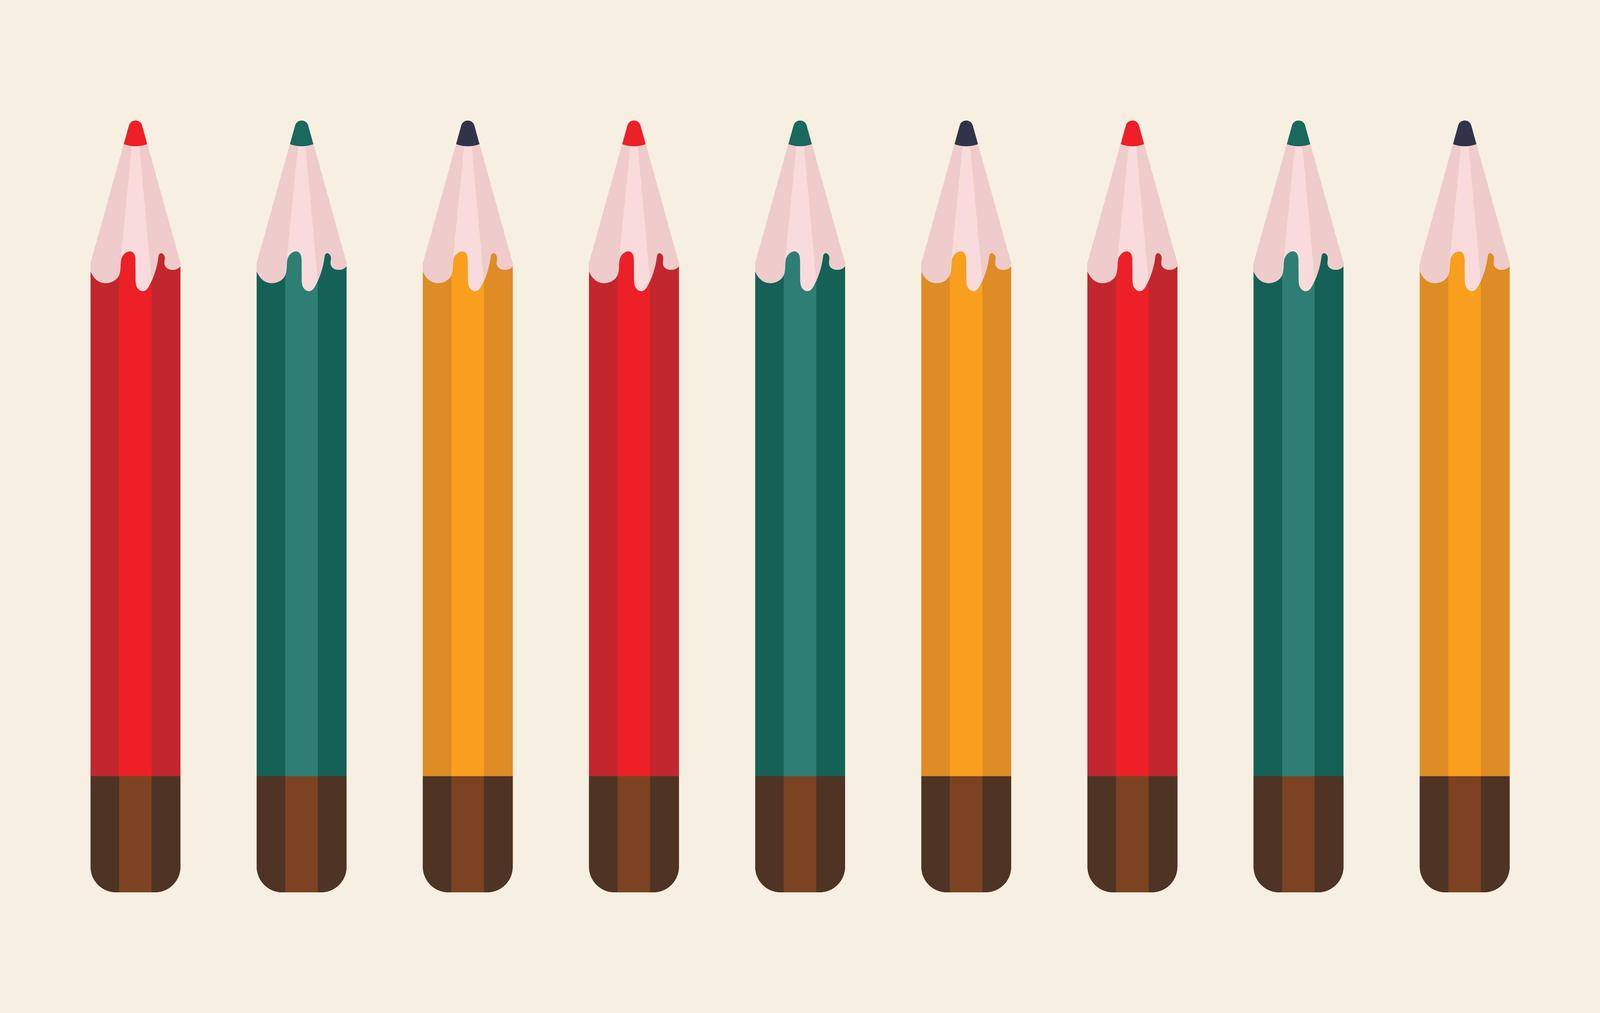 Colorful pencils set in vector design on white background. Supply for elementary school pupil education